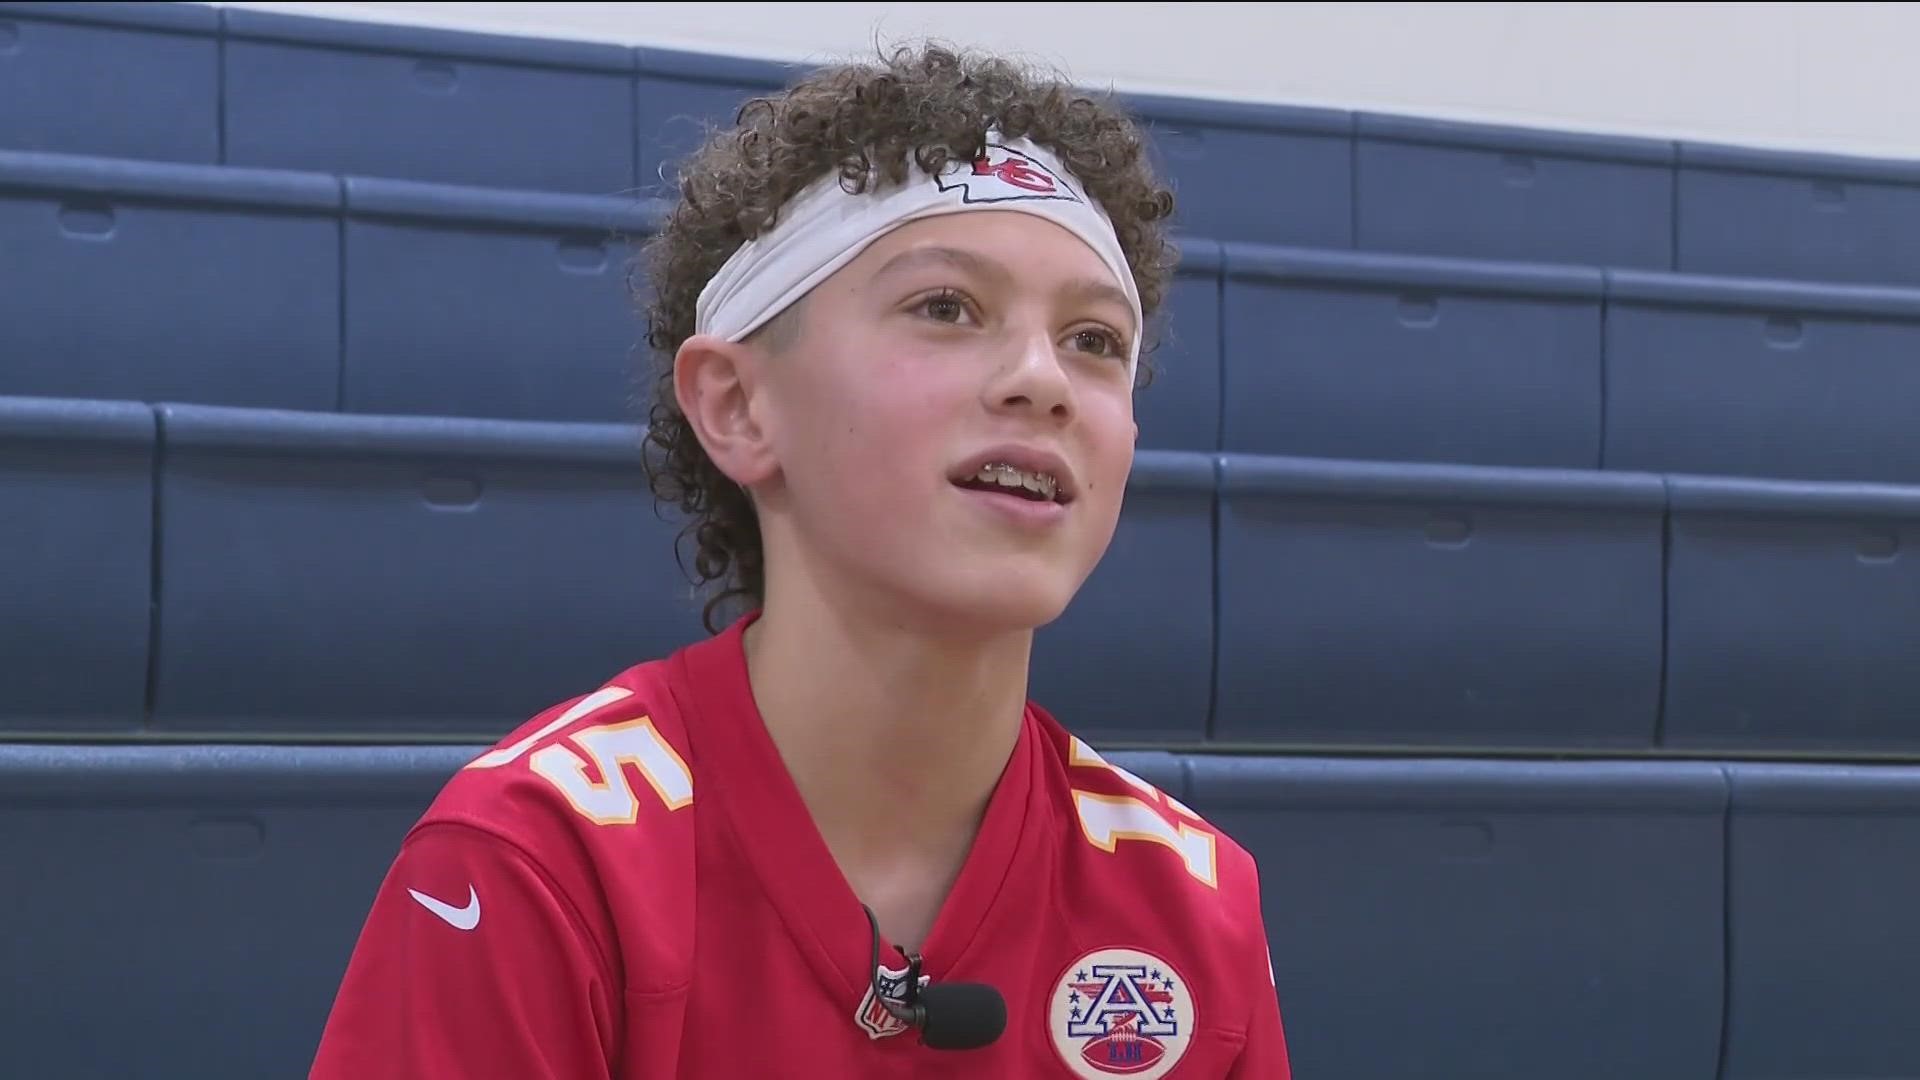 The next Mahomes? Boise youngster certainly has the look